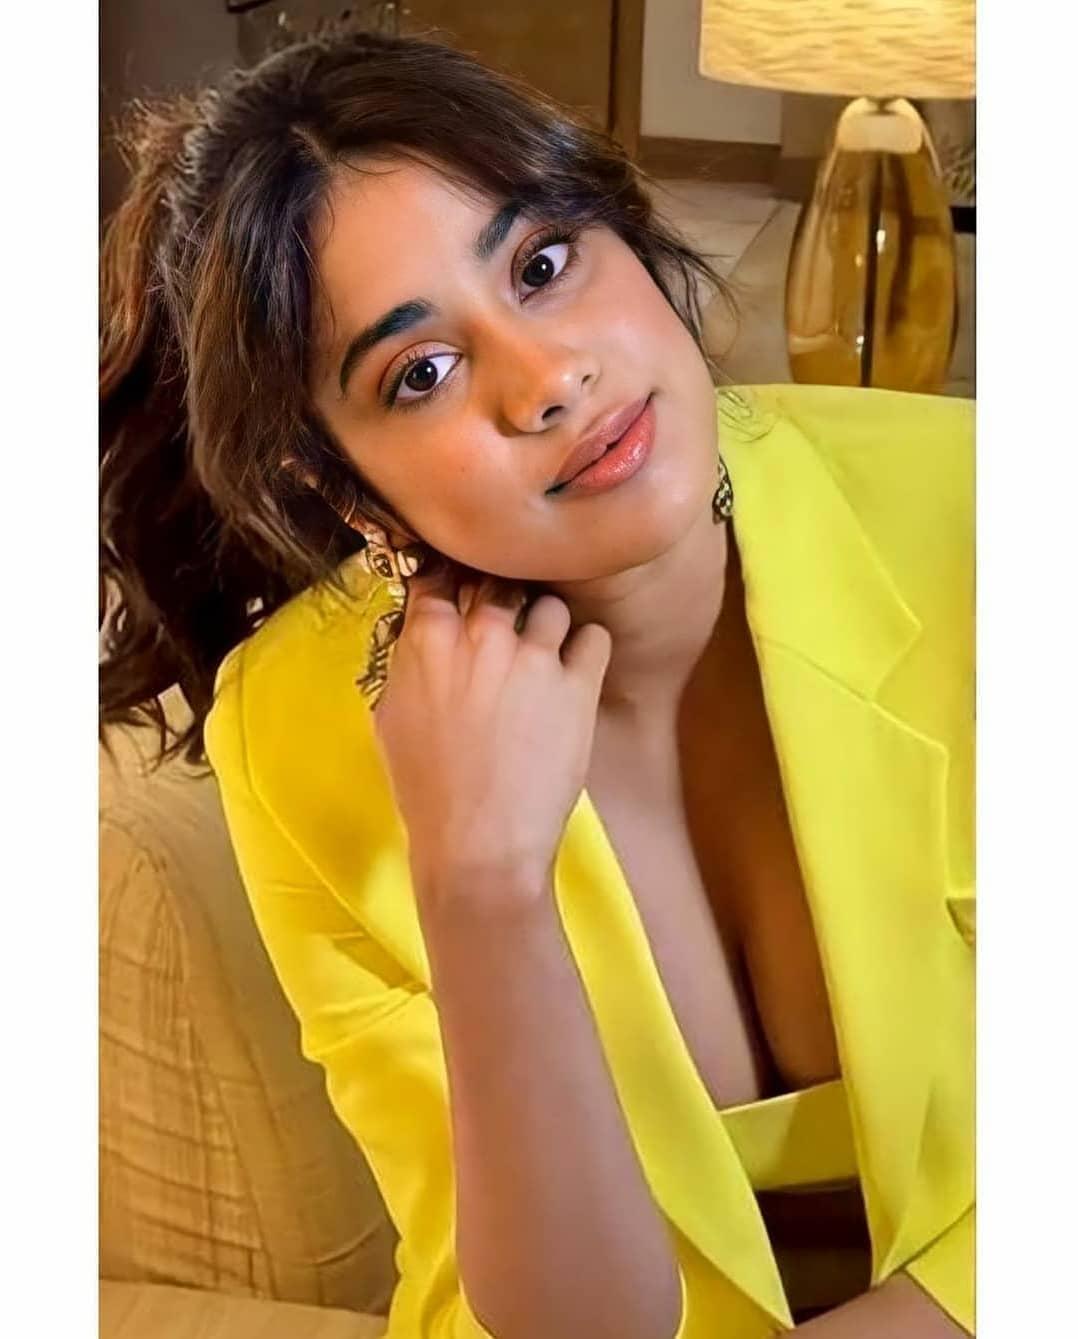 Bollywood actress hot photos |Janhvi Kapoor showing cleavage hot stills  Photos: HD Images, Pictures, Stills, First Look Posters of Bollywood  actress hot photos |Janhvi Kapoor showing cleavage hot stills Movie -  Mallurepost.com